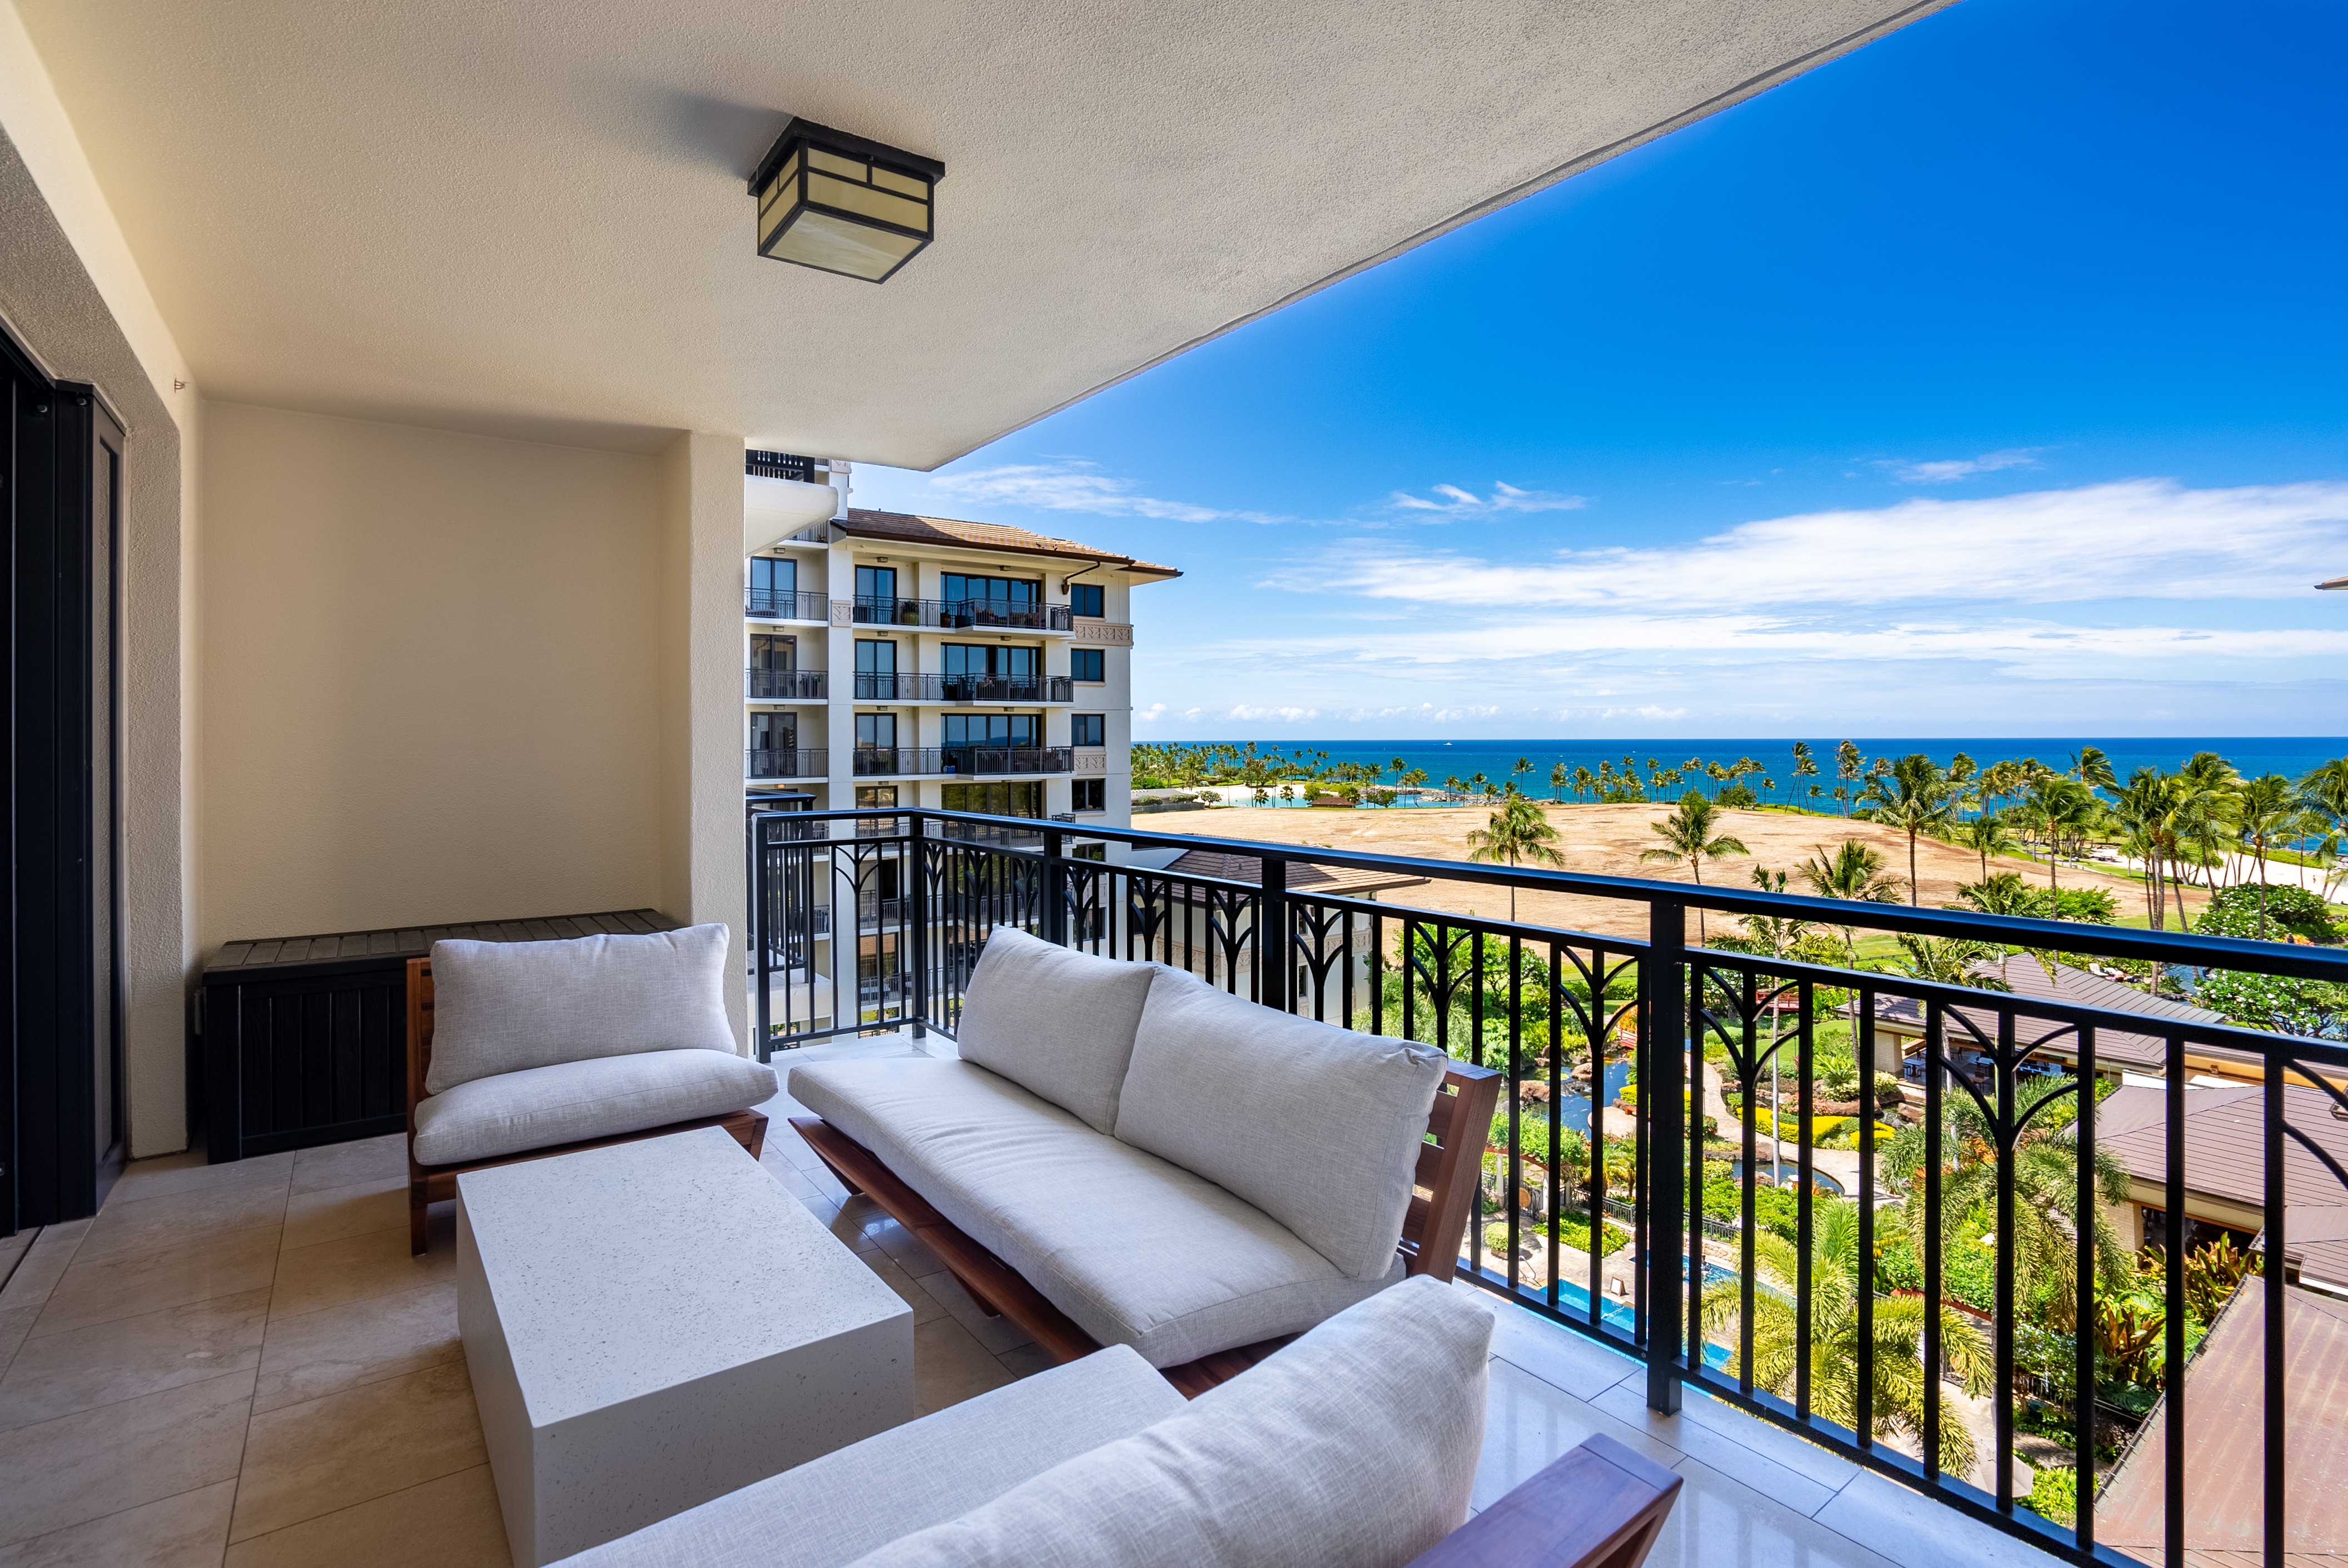 Your private balcony with ocean views.